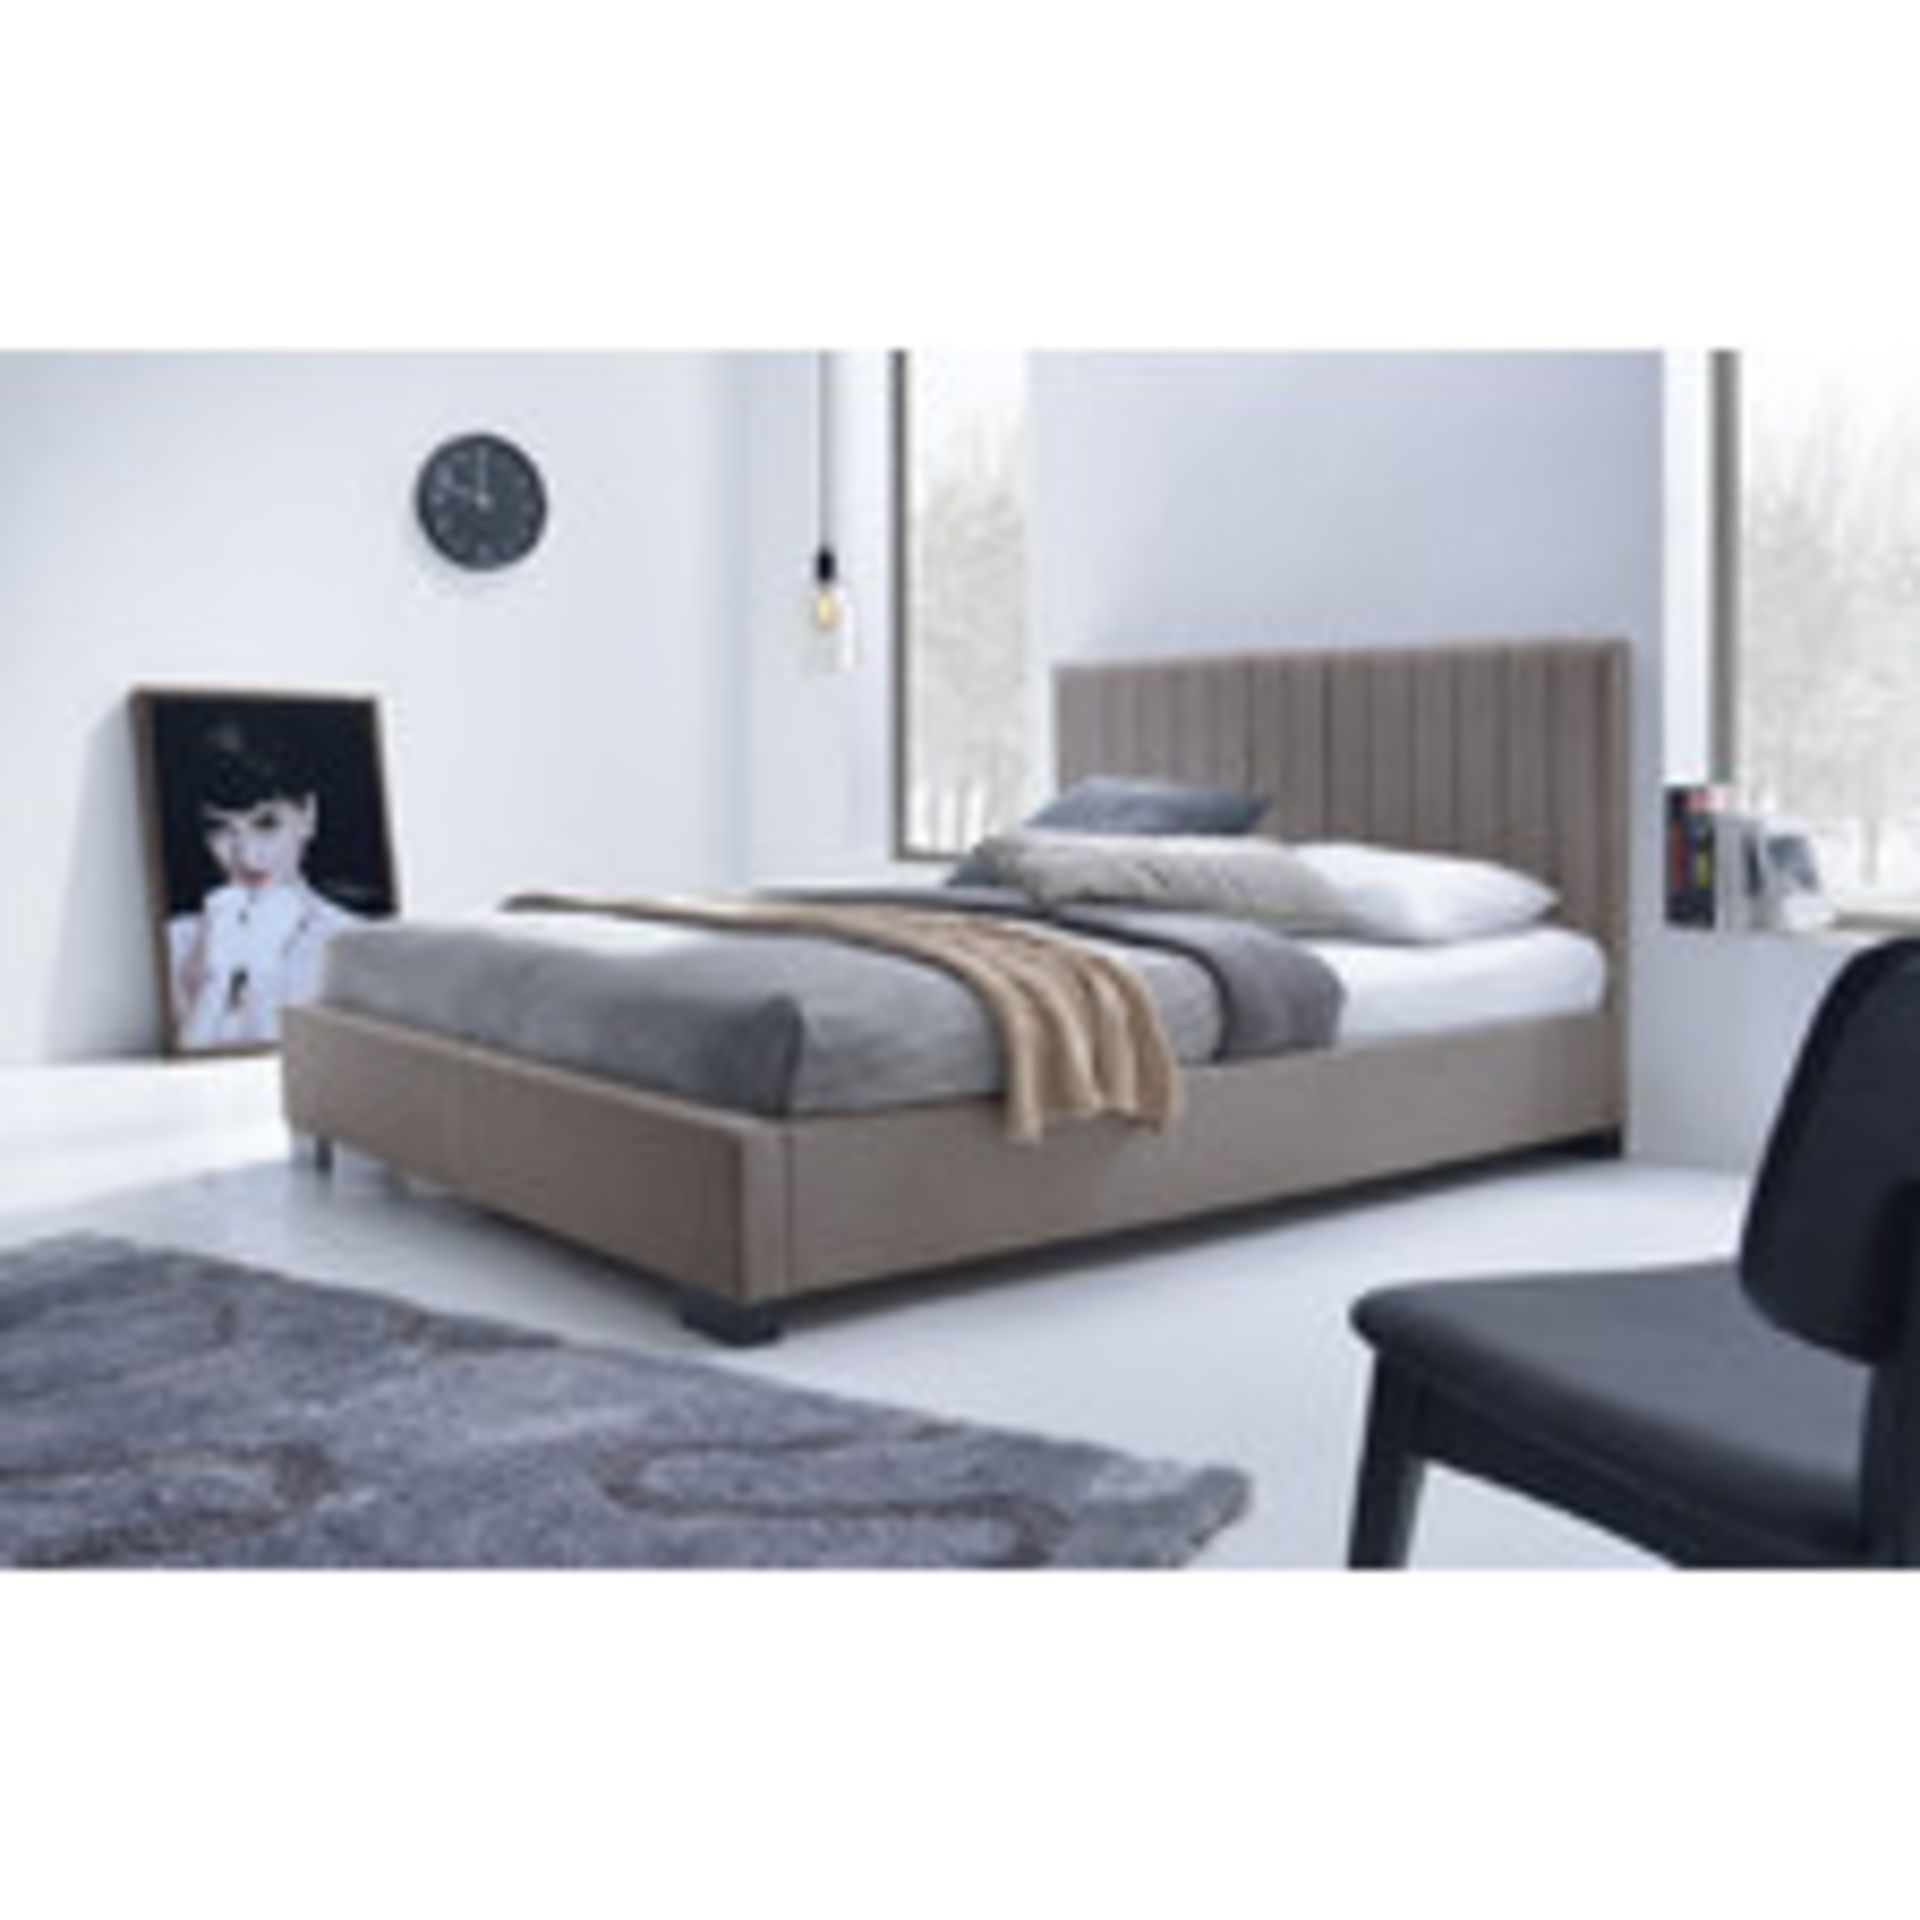 Brand new direct from the manufacturers kingsize baron bedstead in light brown